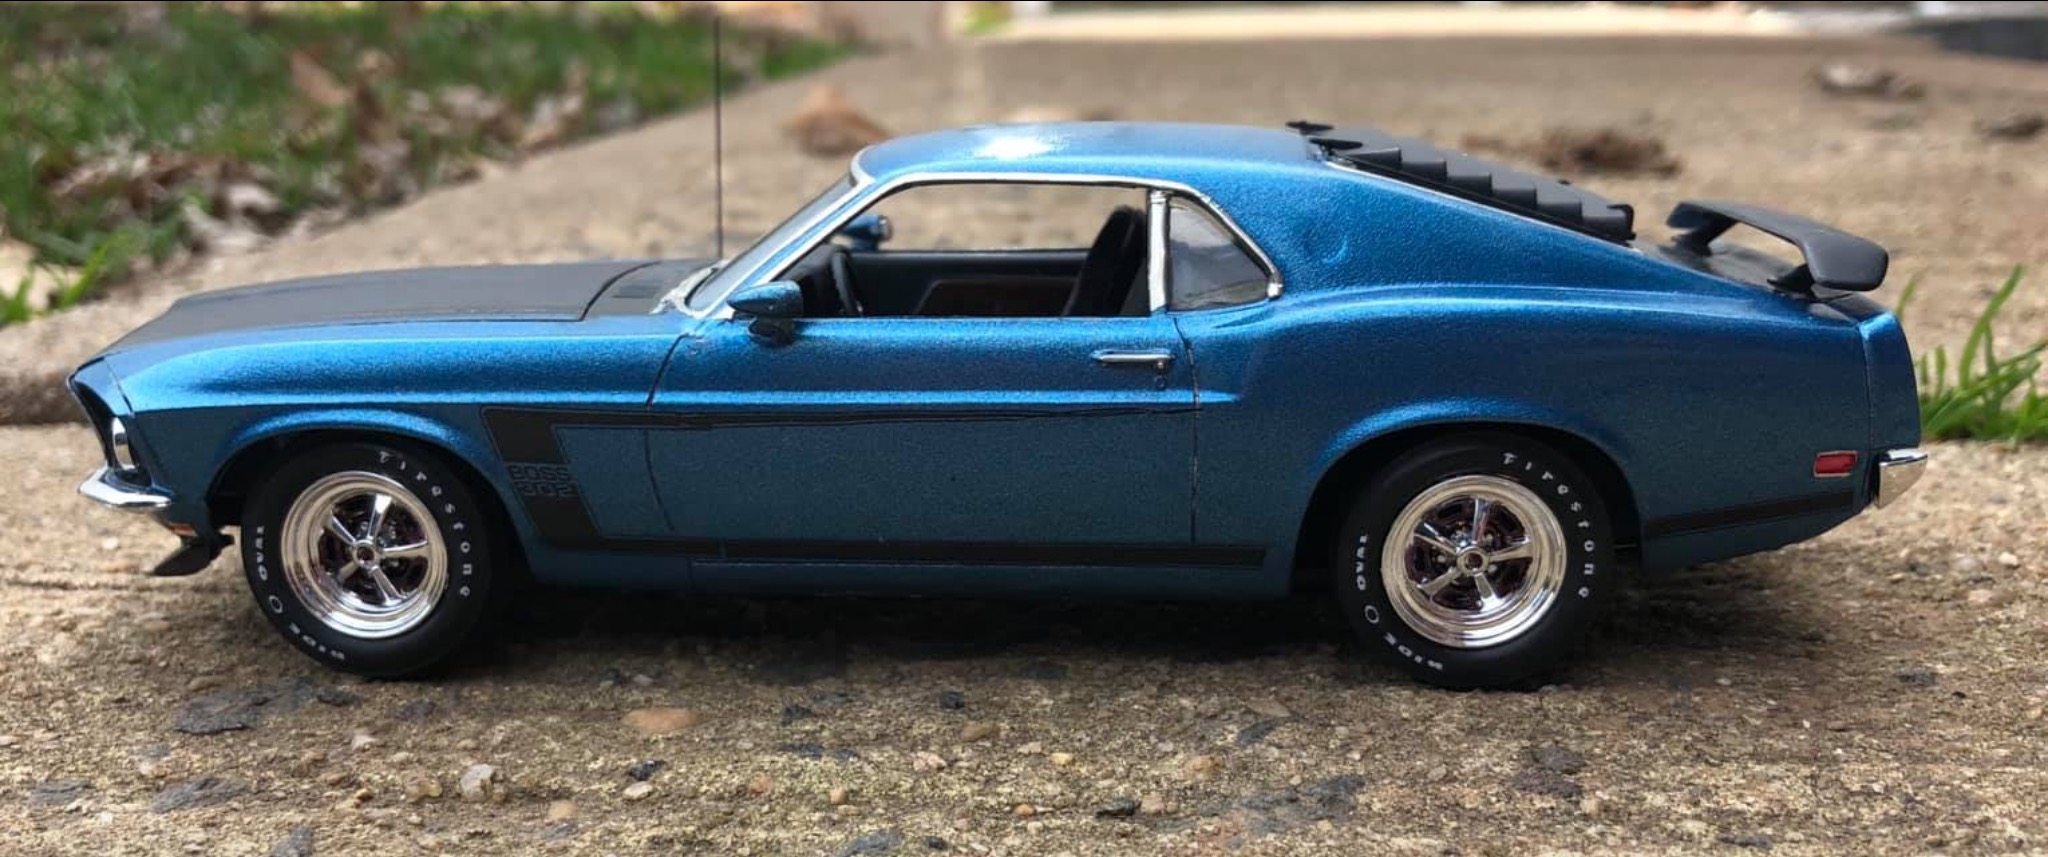 Revell 1969 Mustang Boss 302............My take with pics! - Page 6 ...